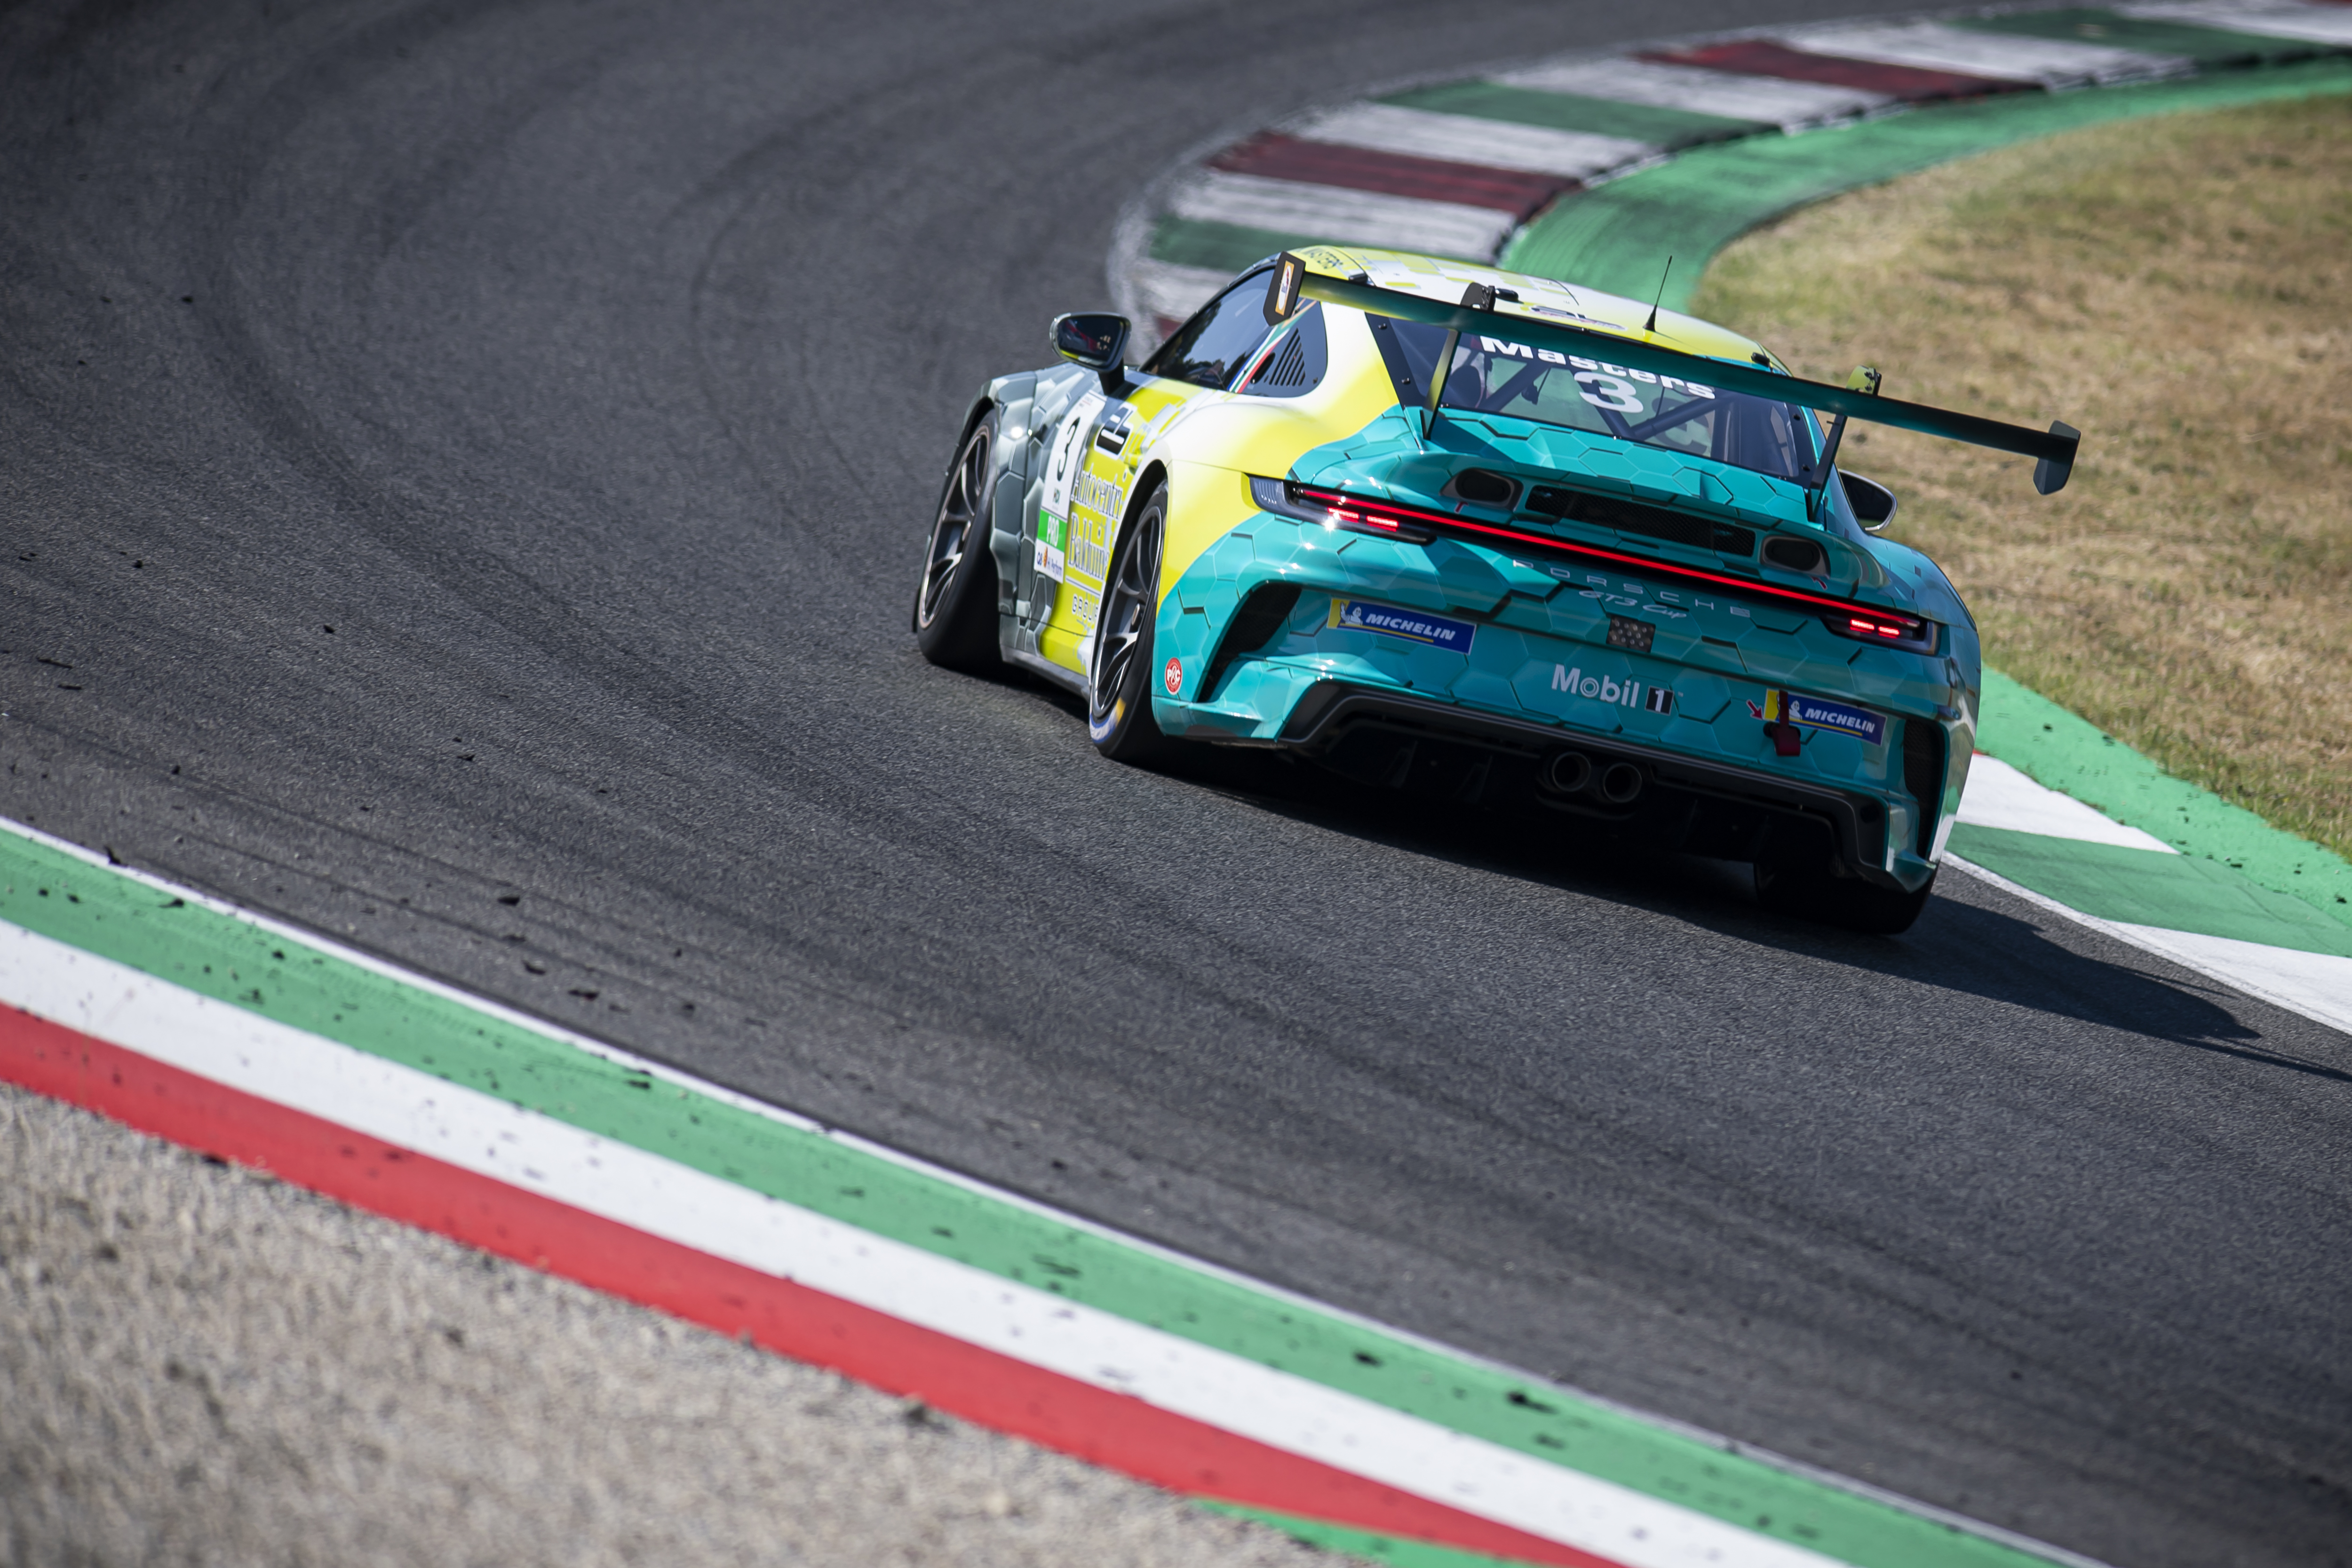 Target with AB Racing on top in Porsche Carrera Italia round at Mugello, Fenici finishes P4 in Michelin Cup